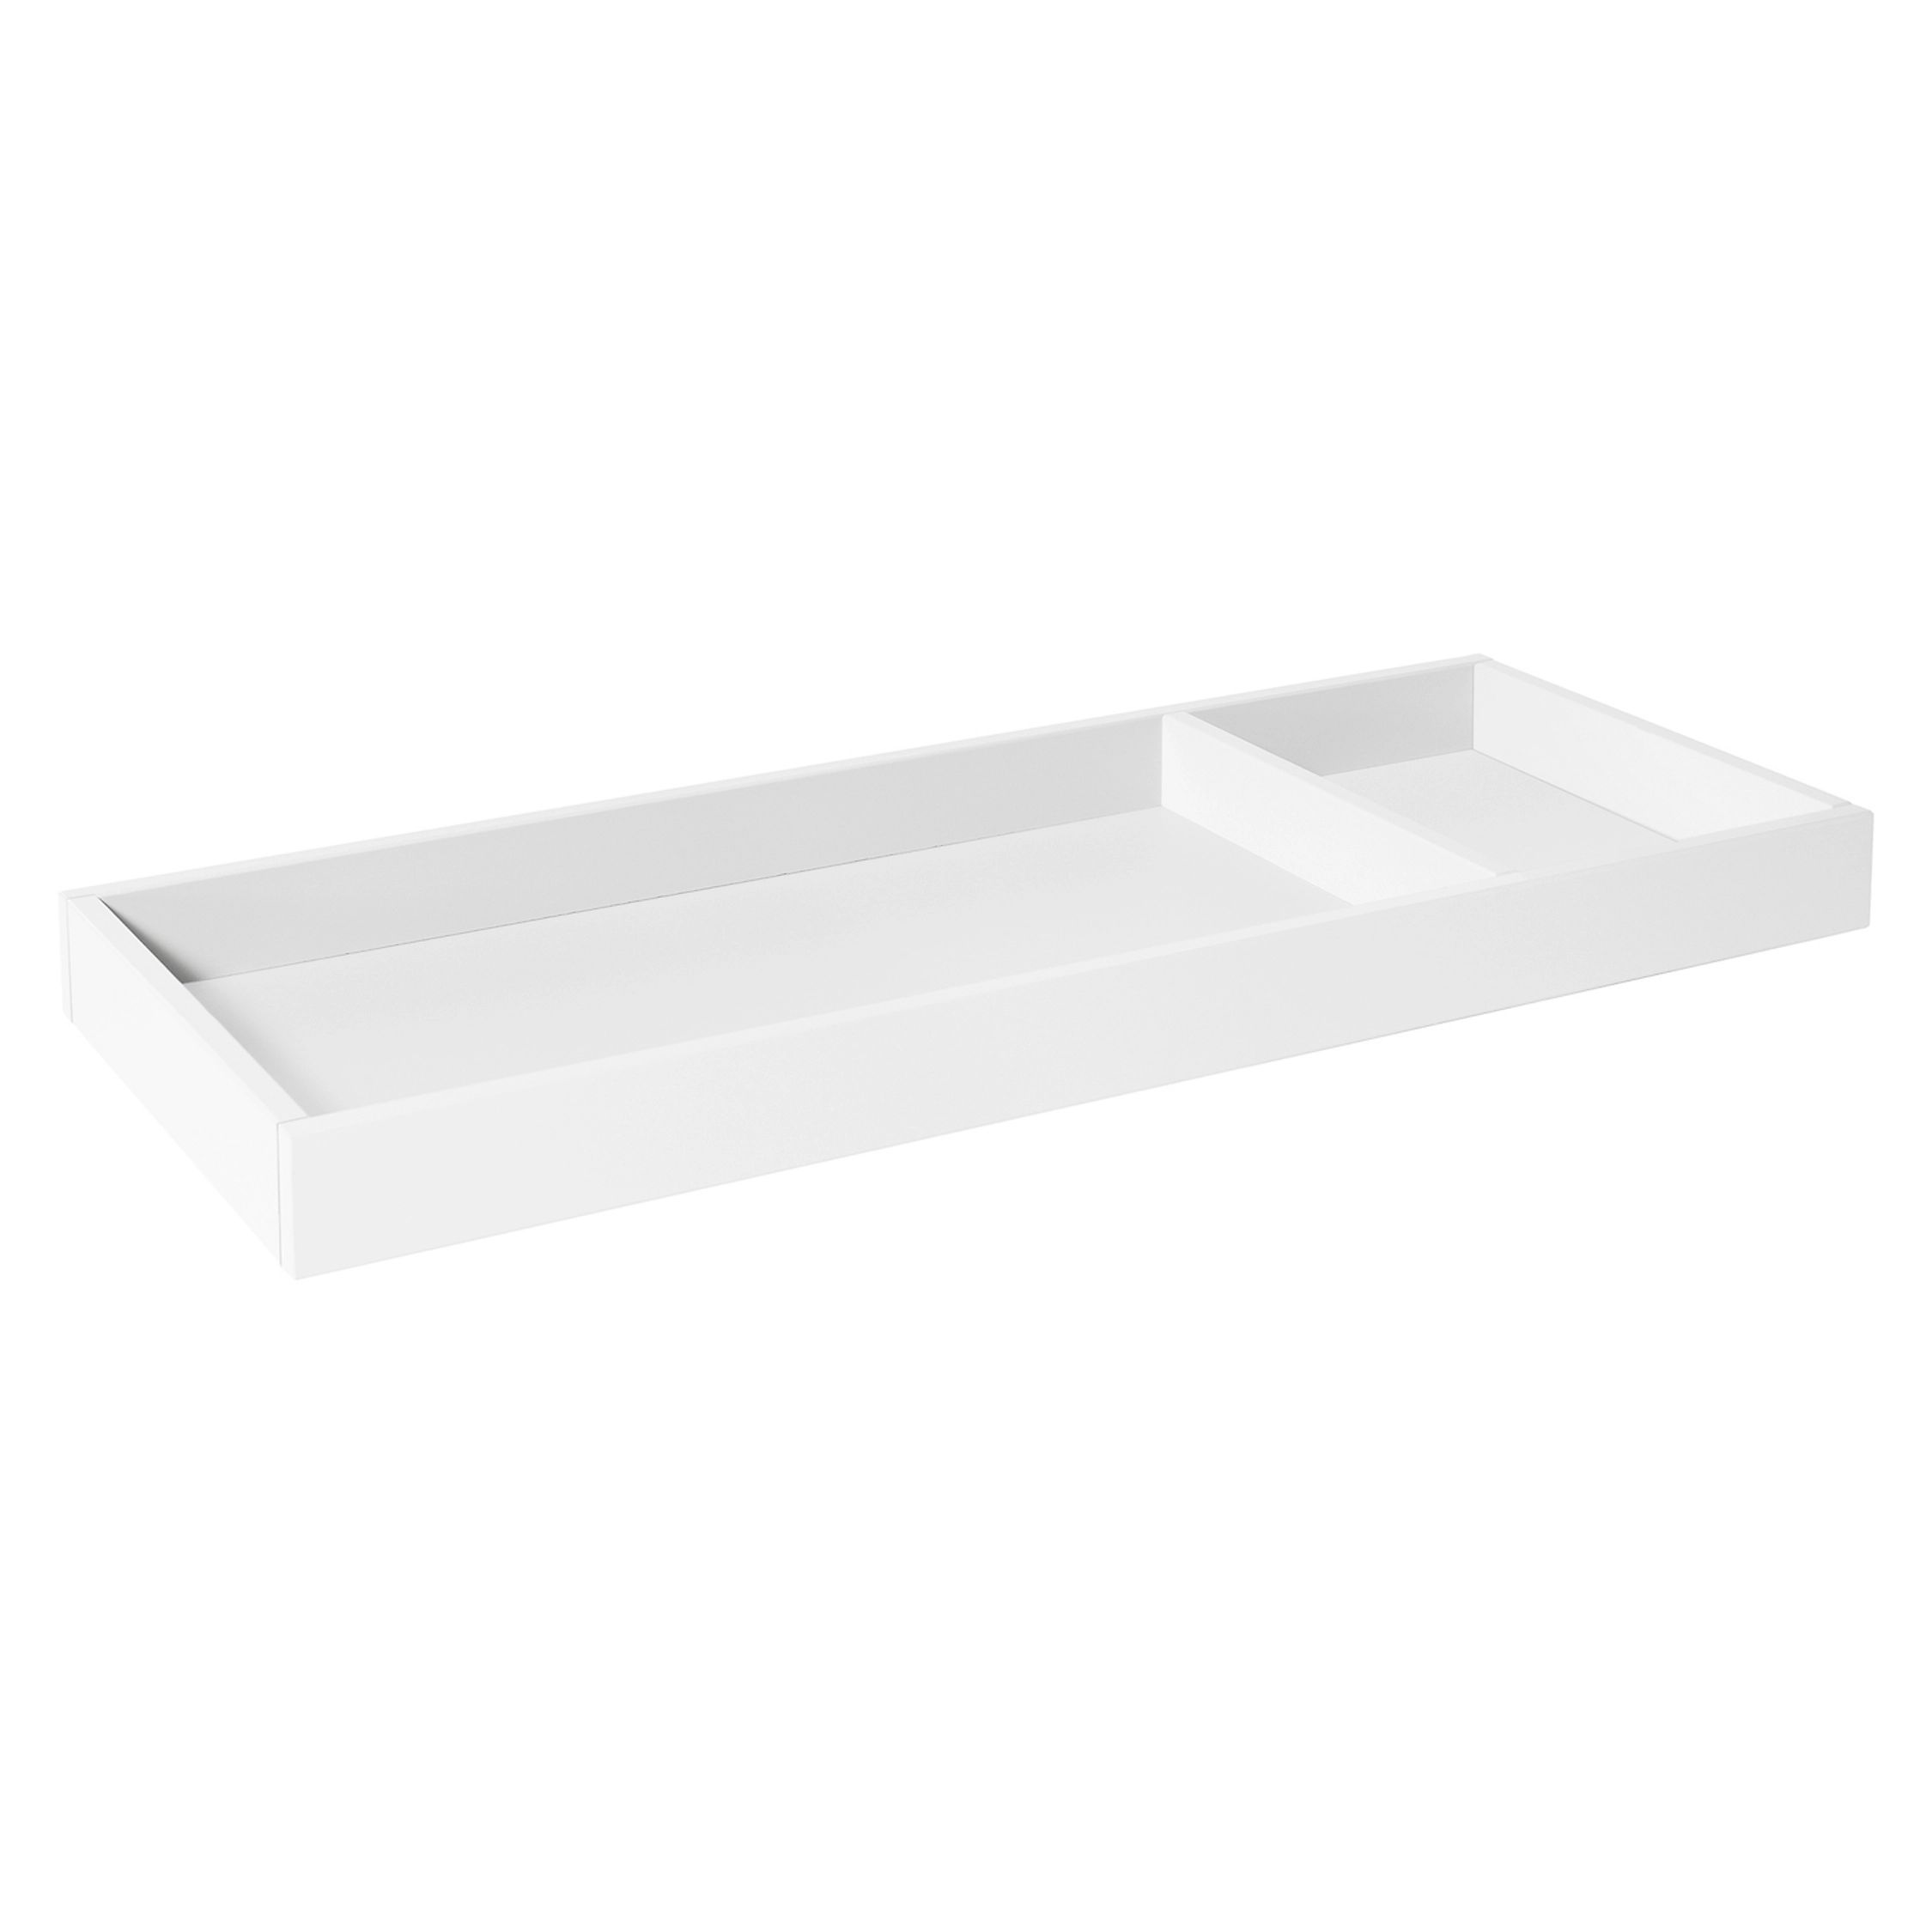 DaVinci Removable Changing Tray for Double Dresser | Kohl's